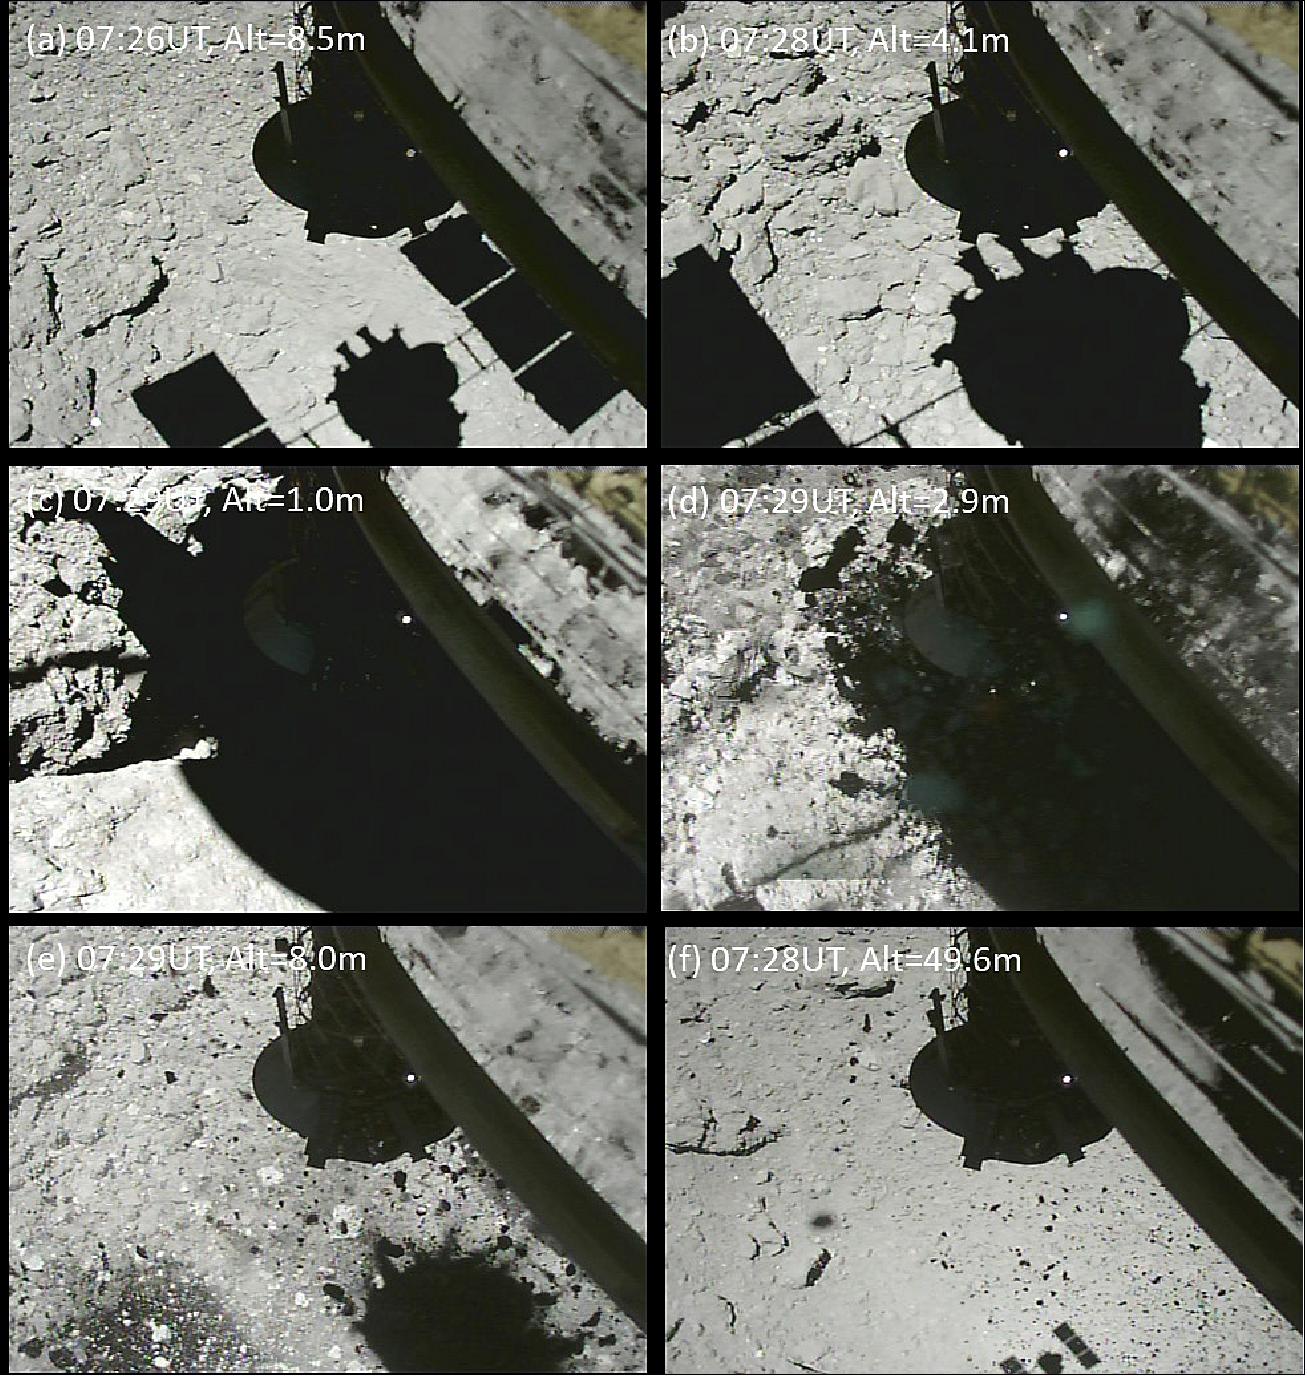 Figure 43: A series of images captured by CAM-H before (a-c) and after (d-f) the touchdown (image credit: Hayabusa-2 Team)